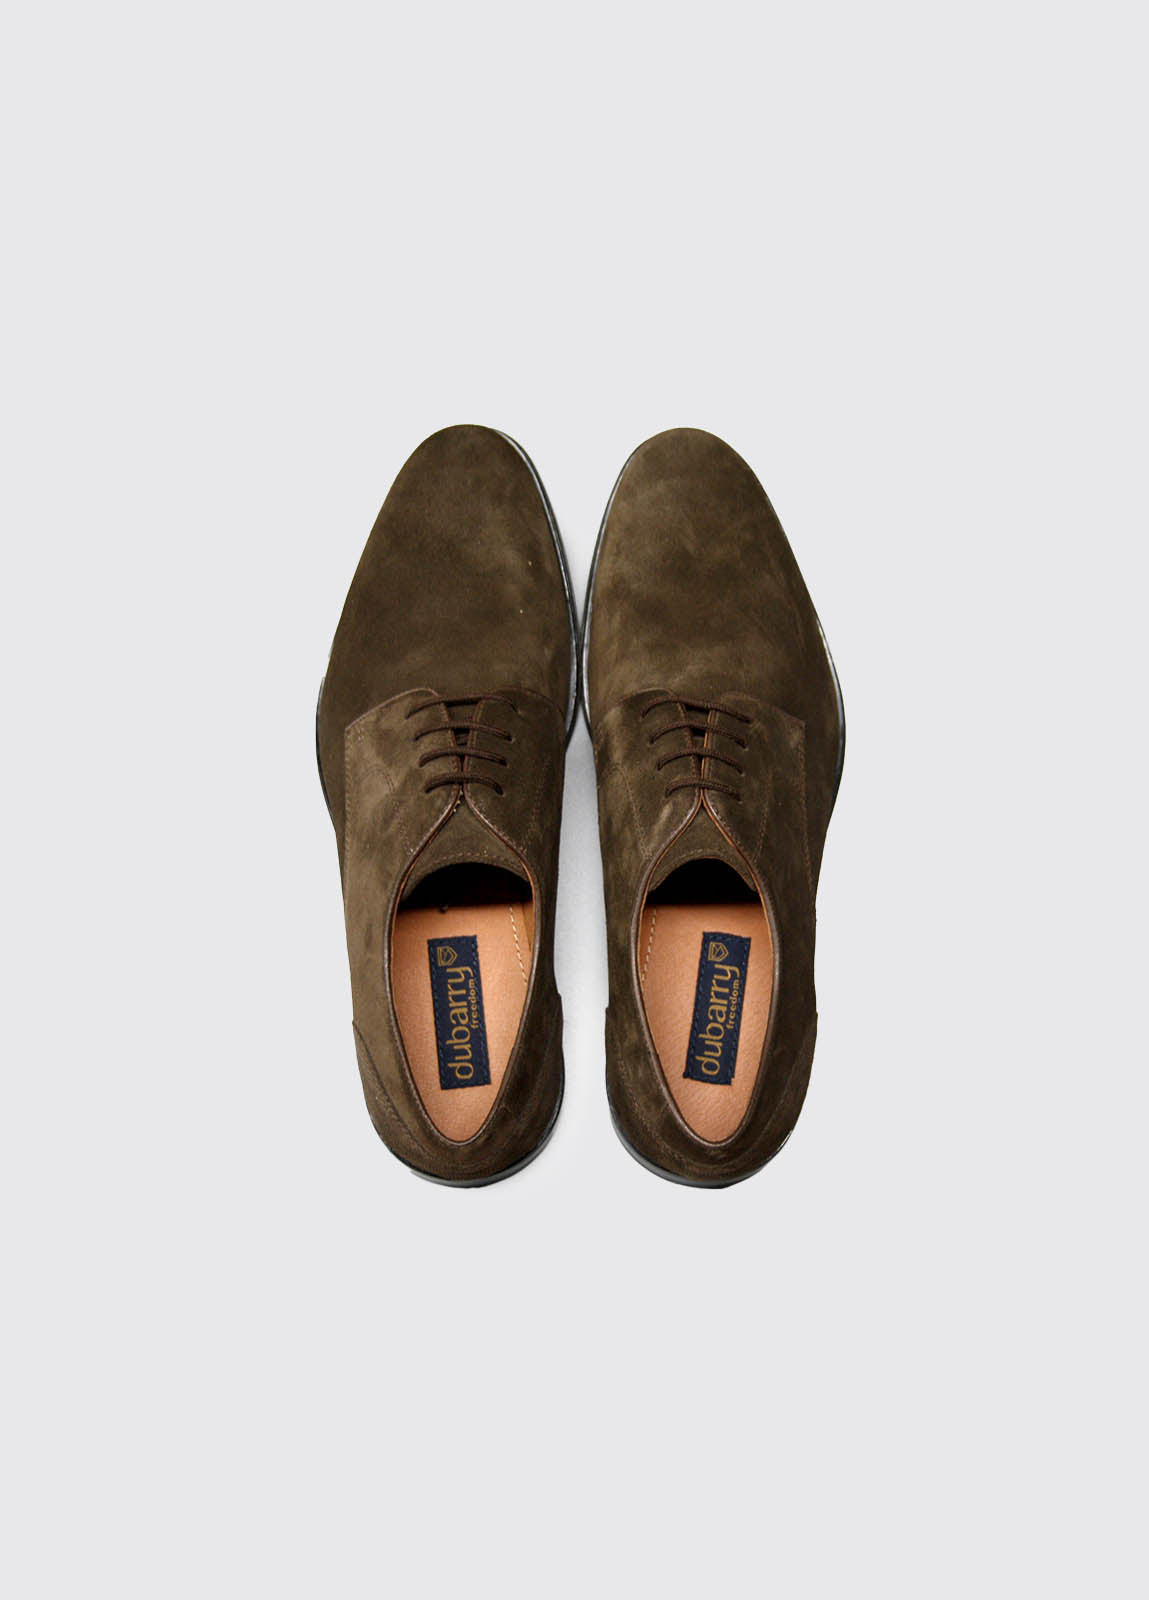 Sarge Walnut Suede Shoe-Top down view